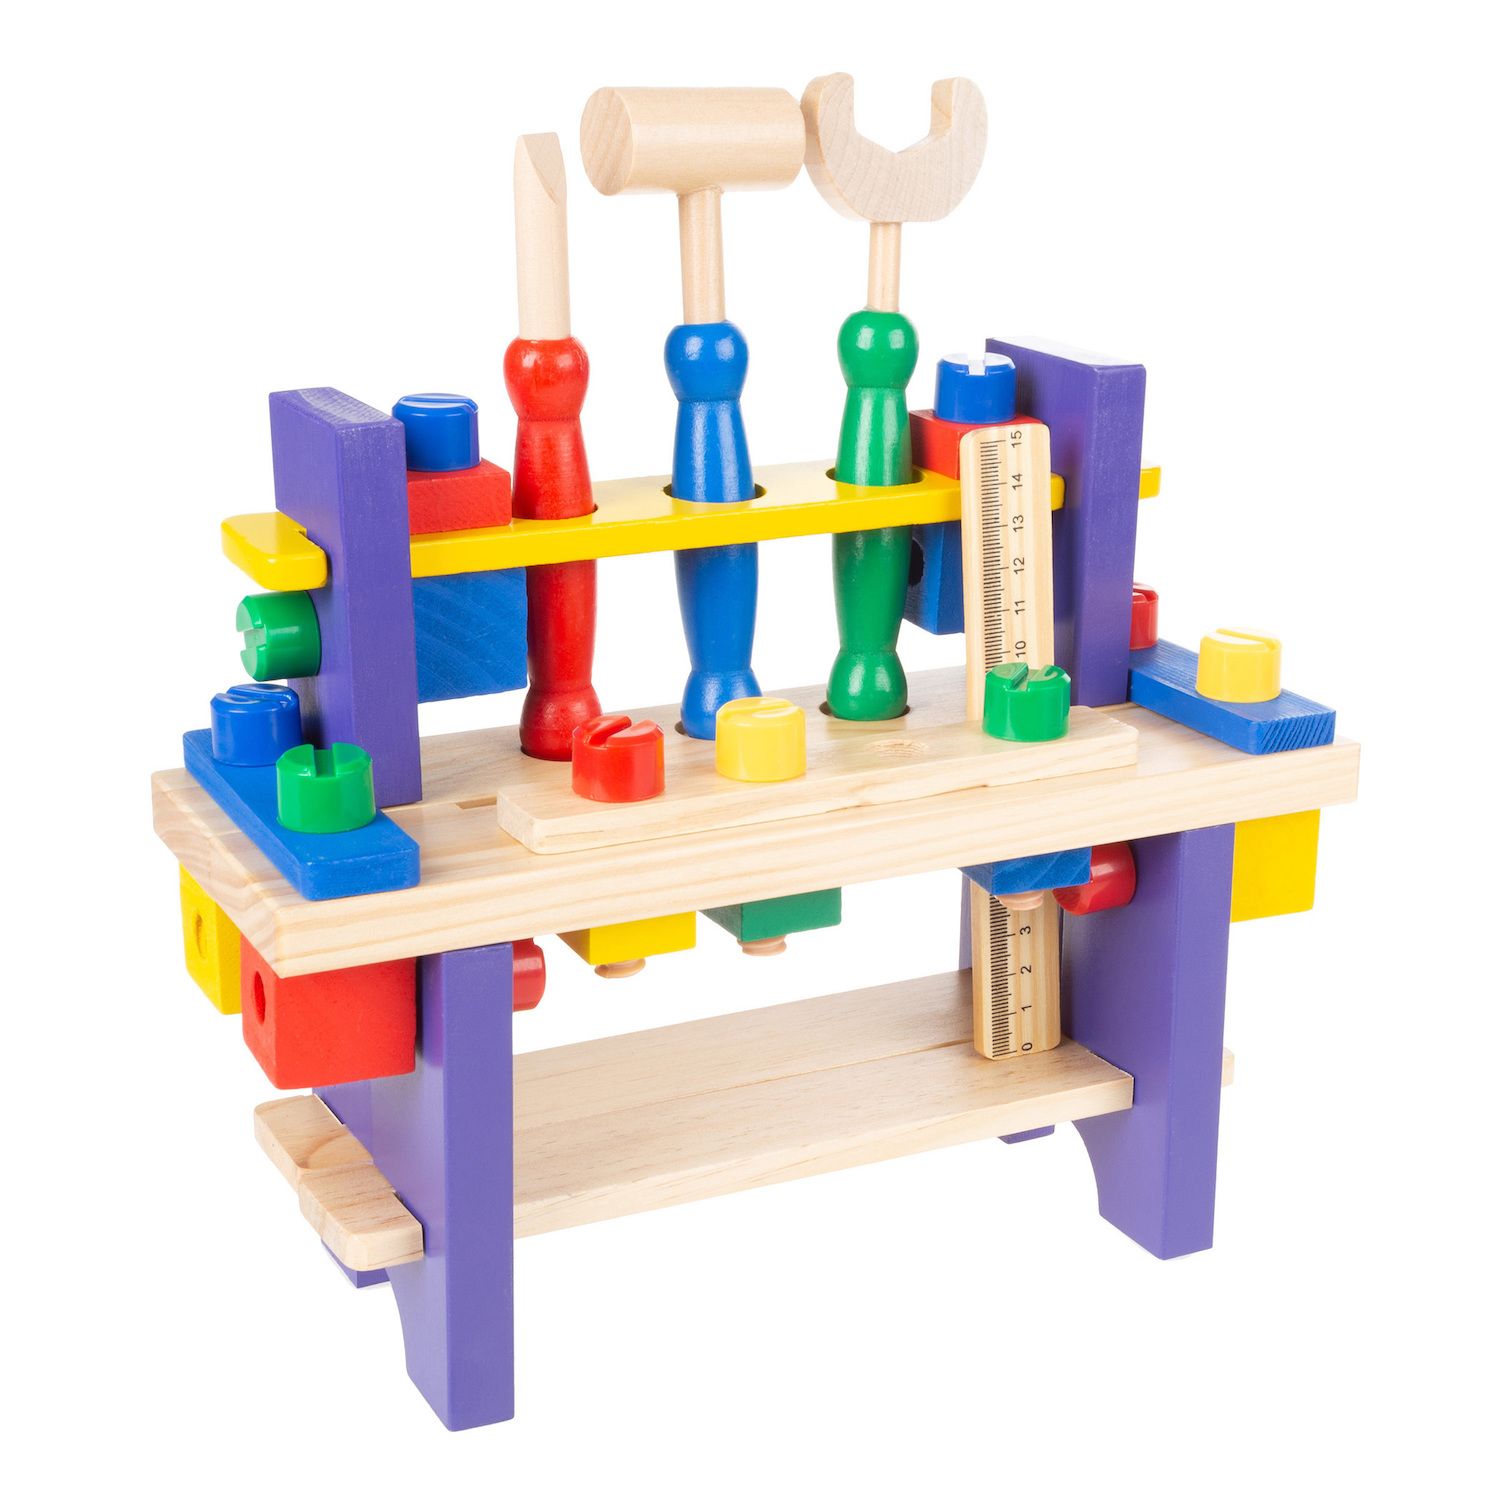 Image for Hey! Play! Kids Workbench and Tool Set - Solid Wood Tabletop Workshop at Kohl's.